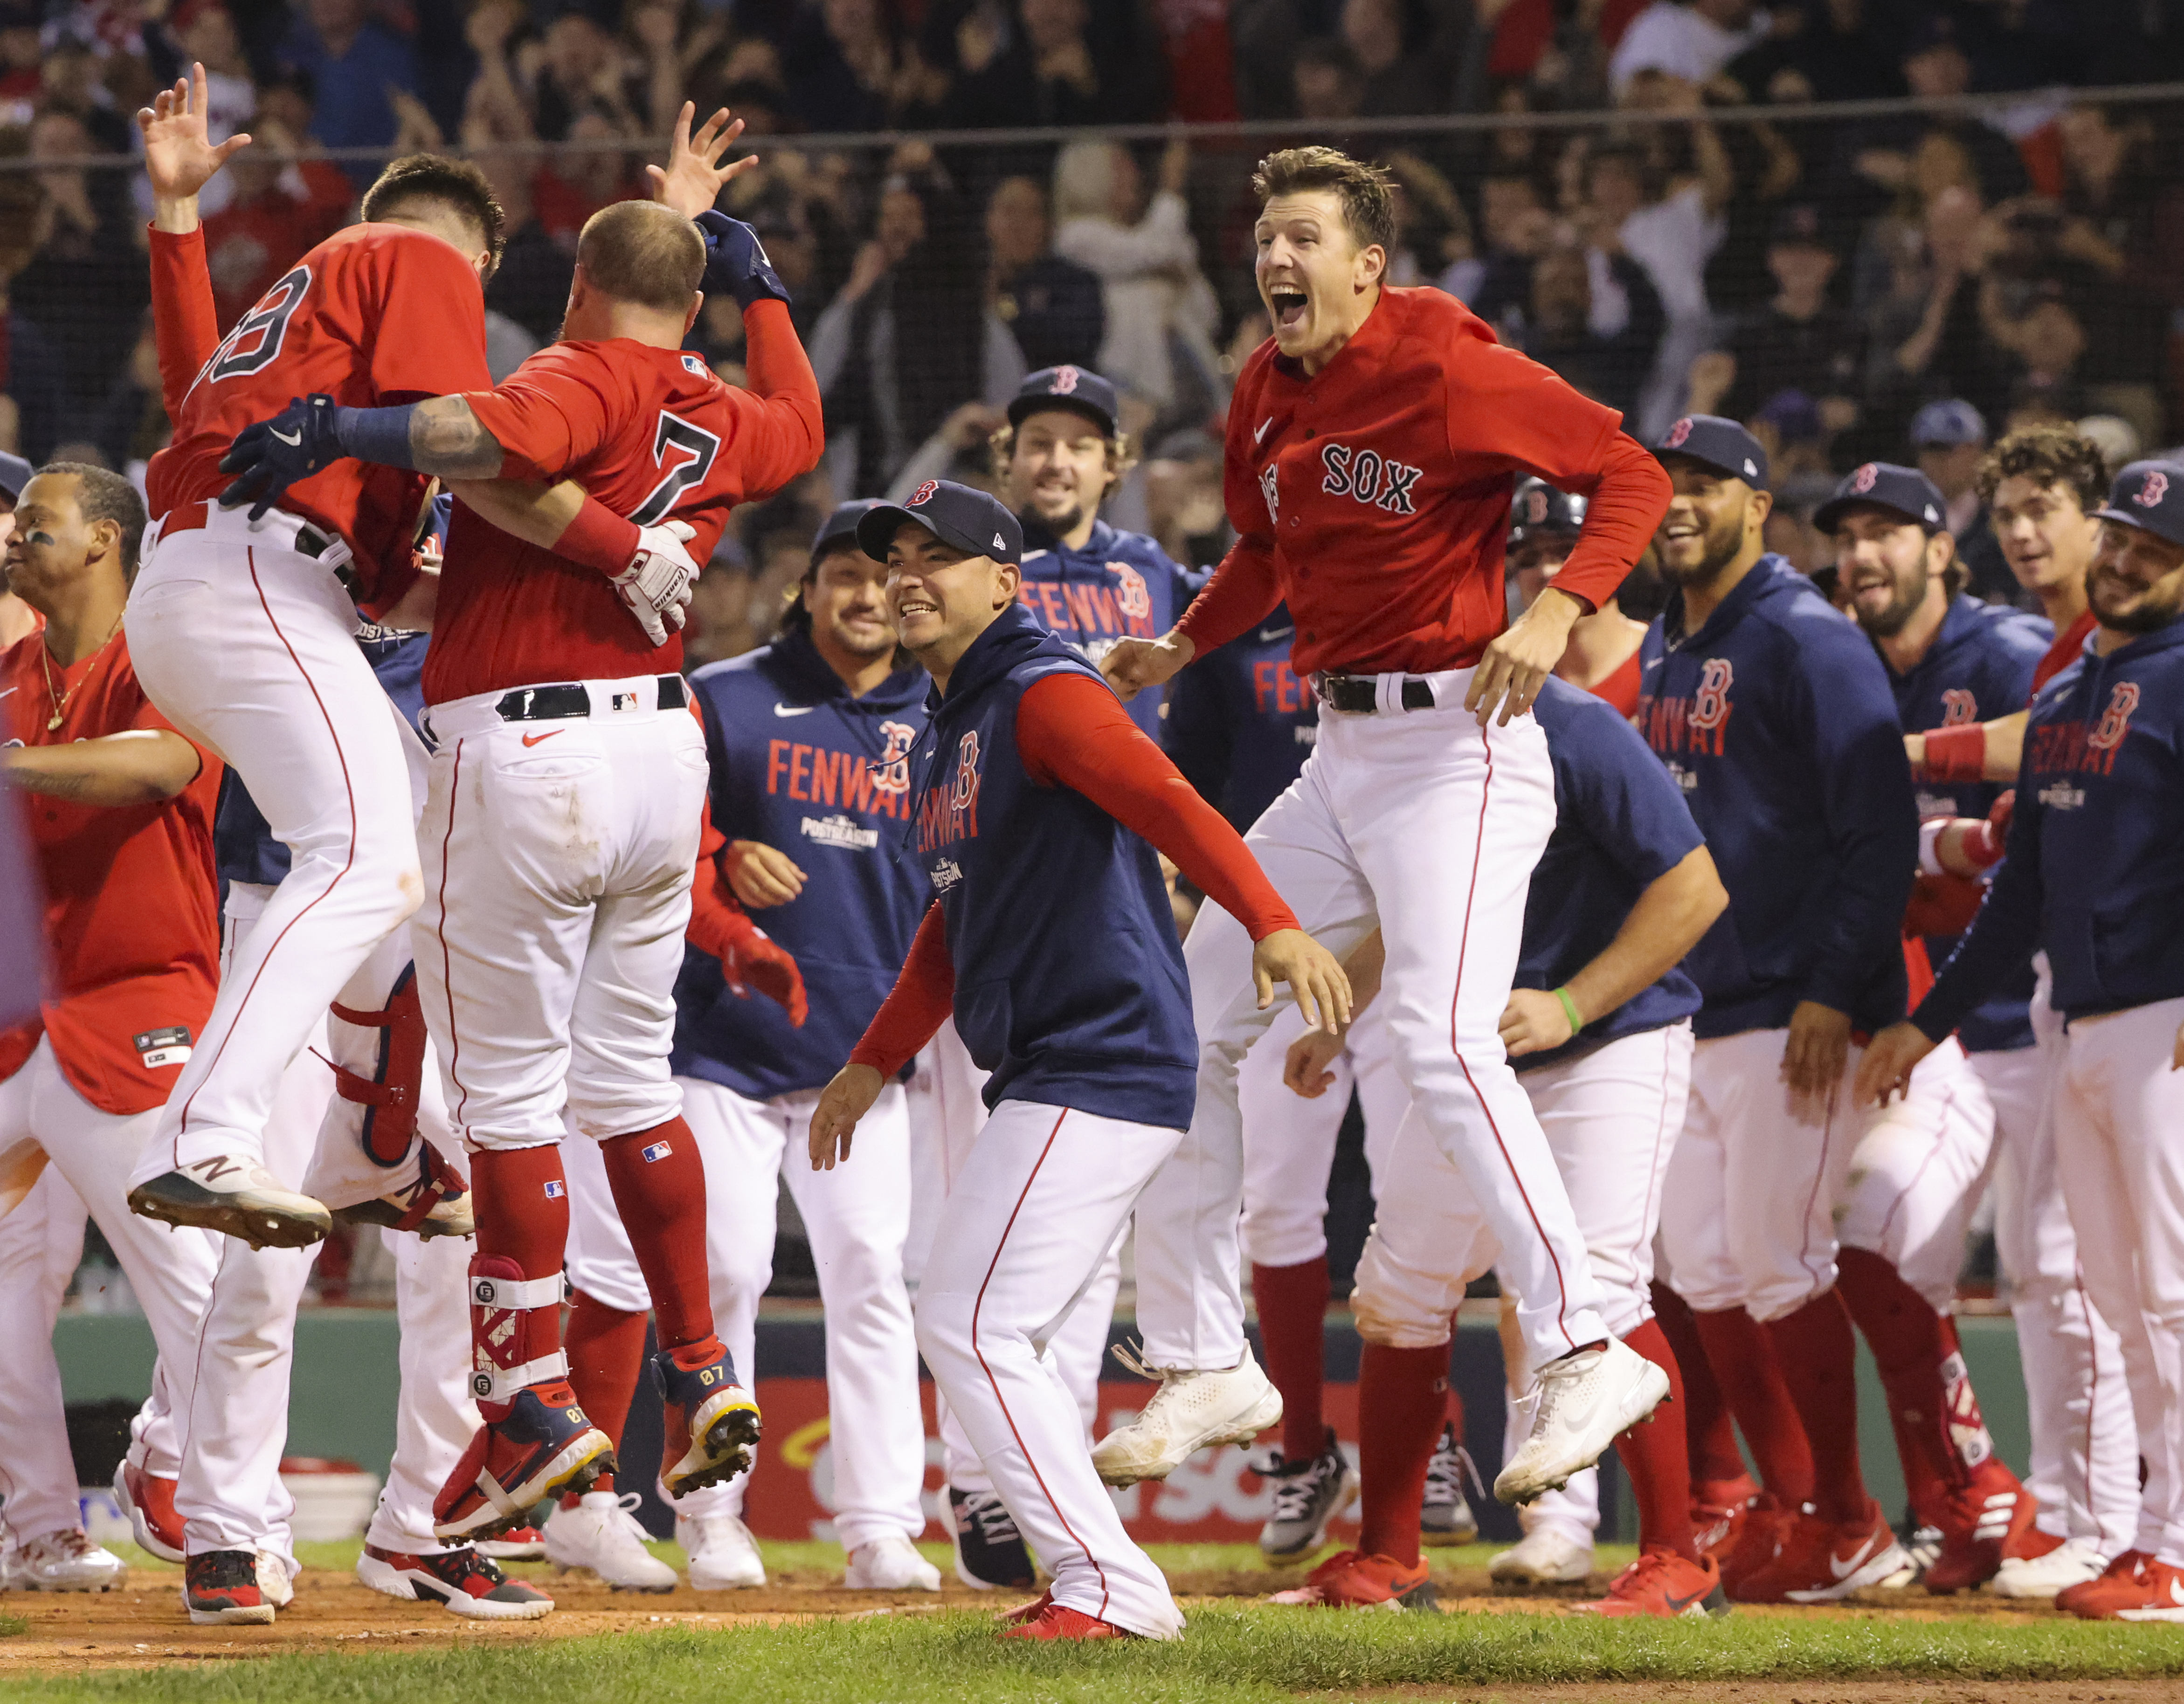 Red Sox romp over Indians, force Game 7 - The Boston Globe